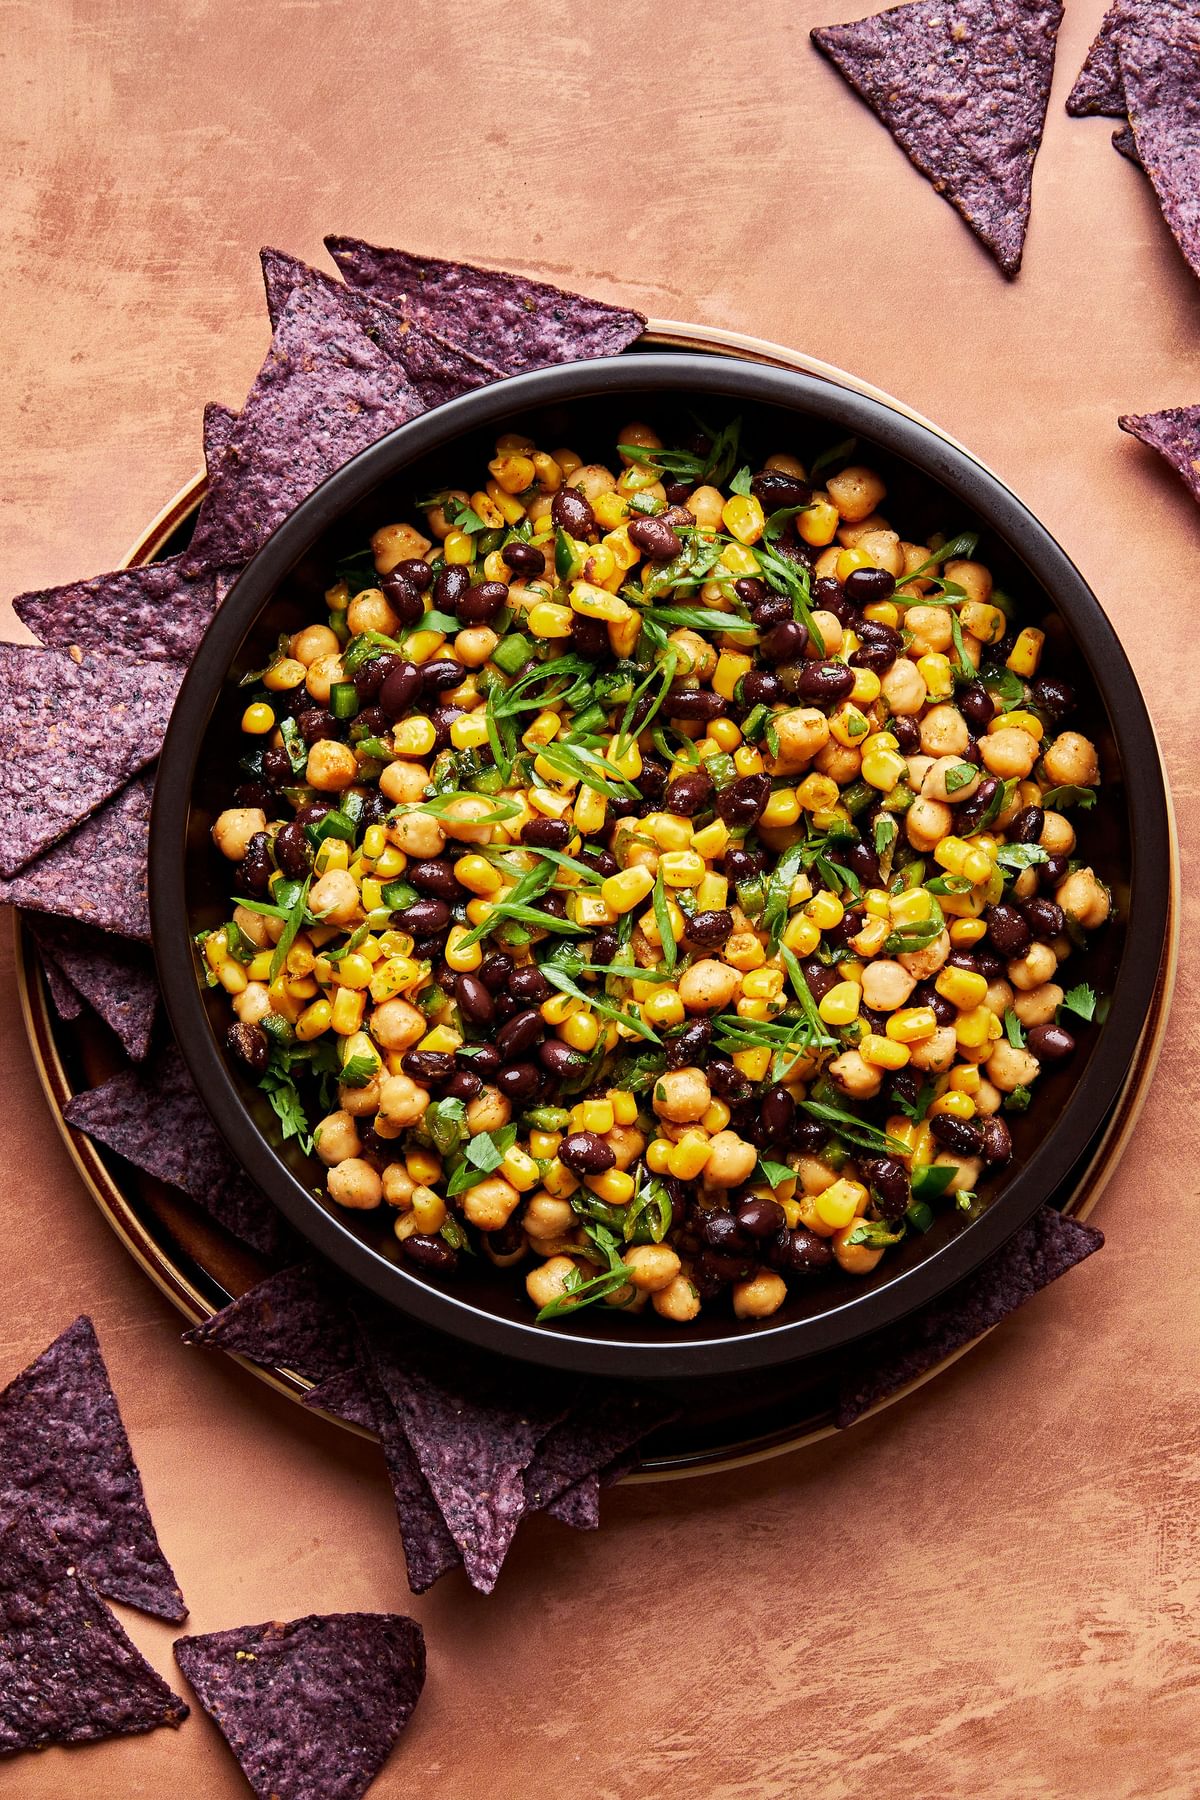 homemade Sweet and Smoky Bean and Corn Salsa in a serving bowl surrounded by tortilla chips for dipping